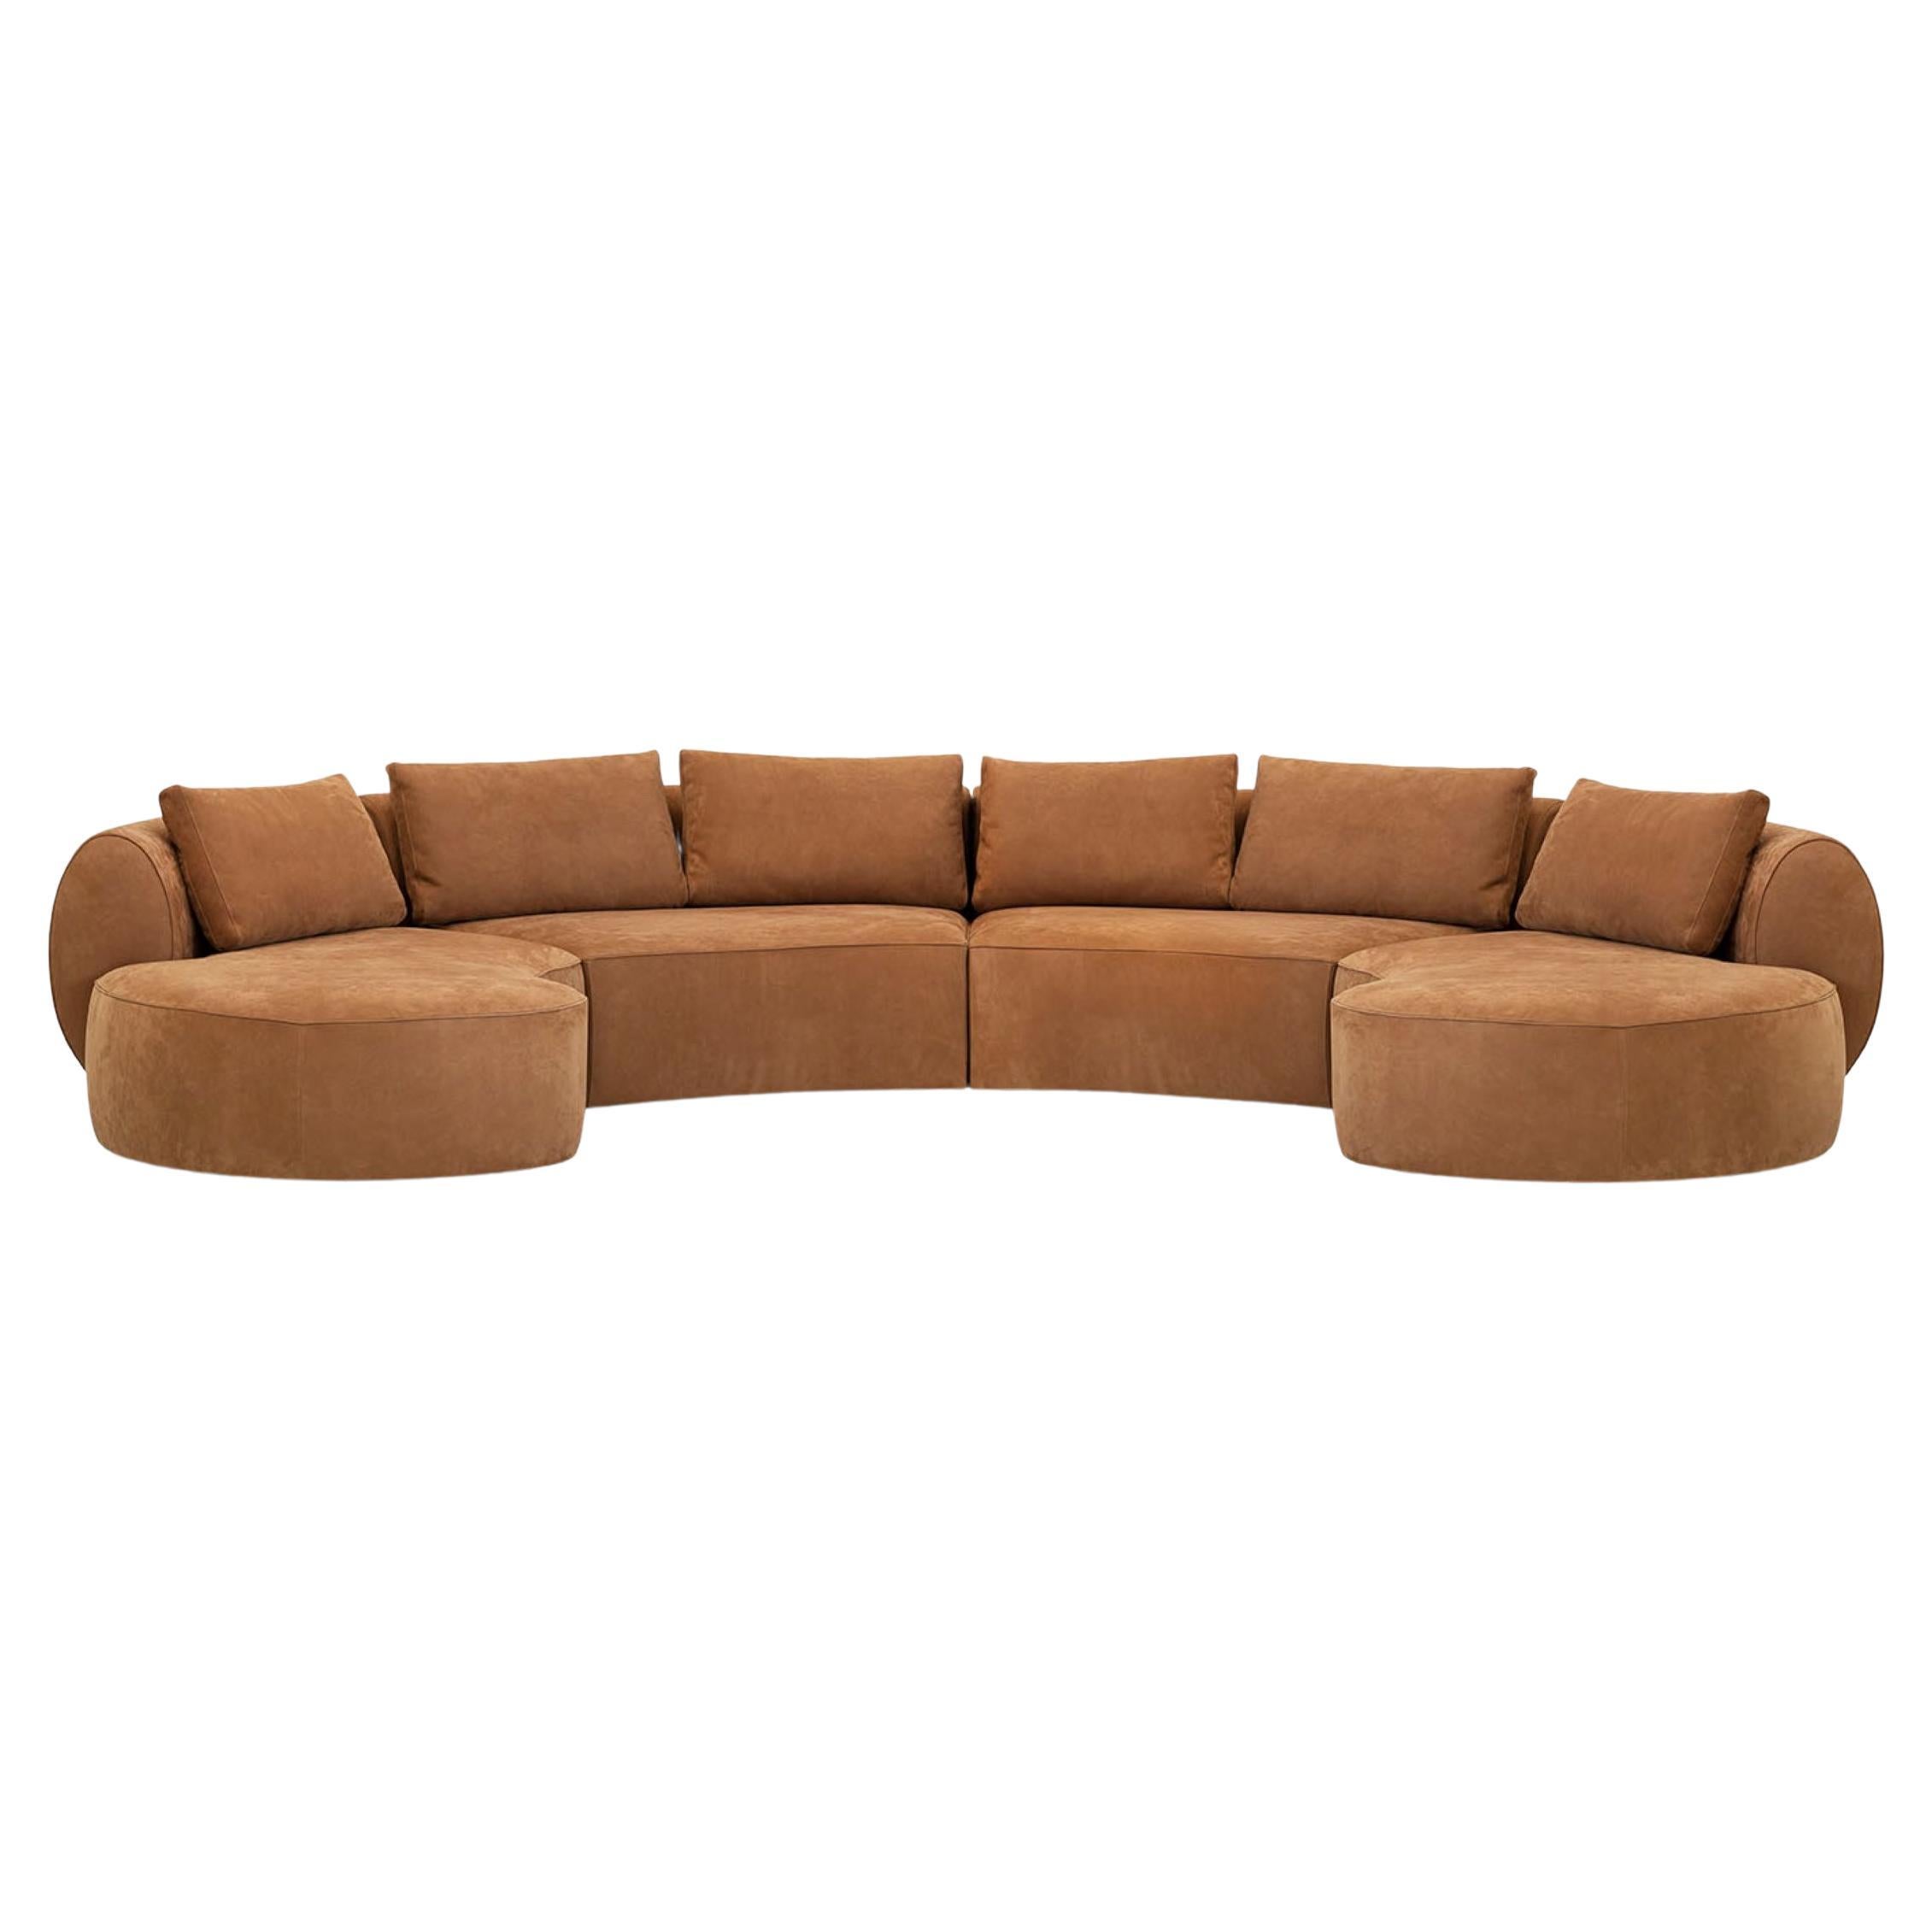 Modern Modular Sofa Frame Made in Wood Leather Customisable For Sale